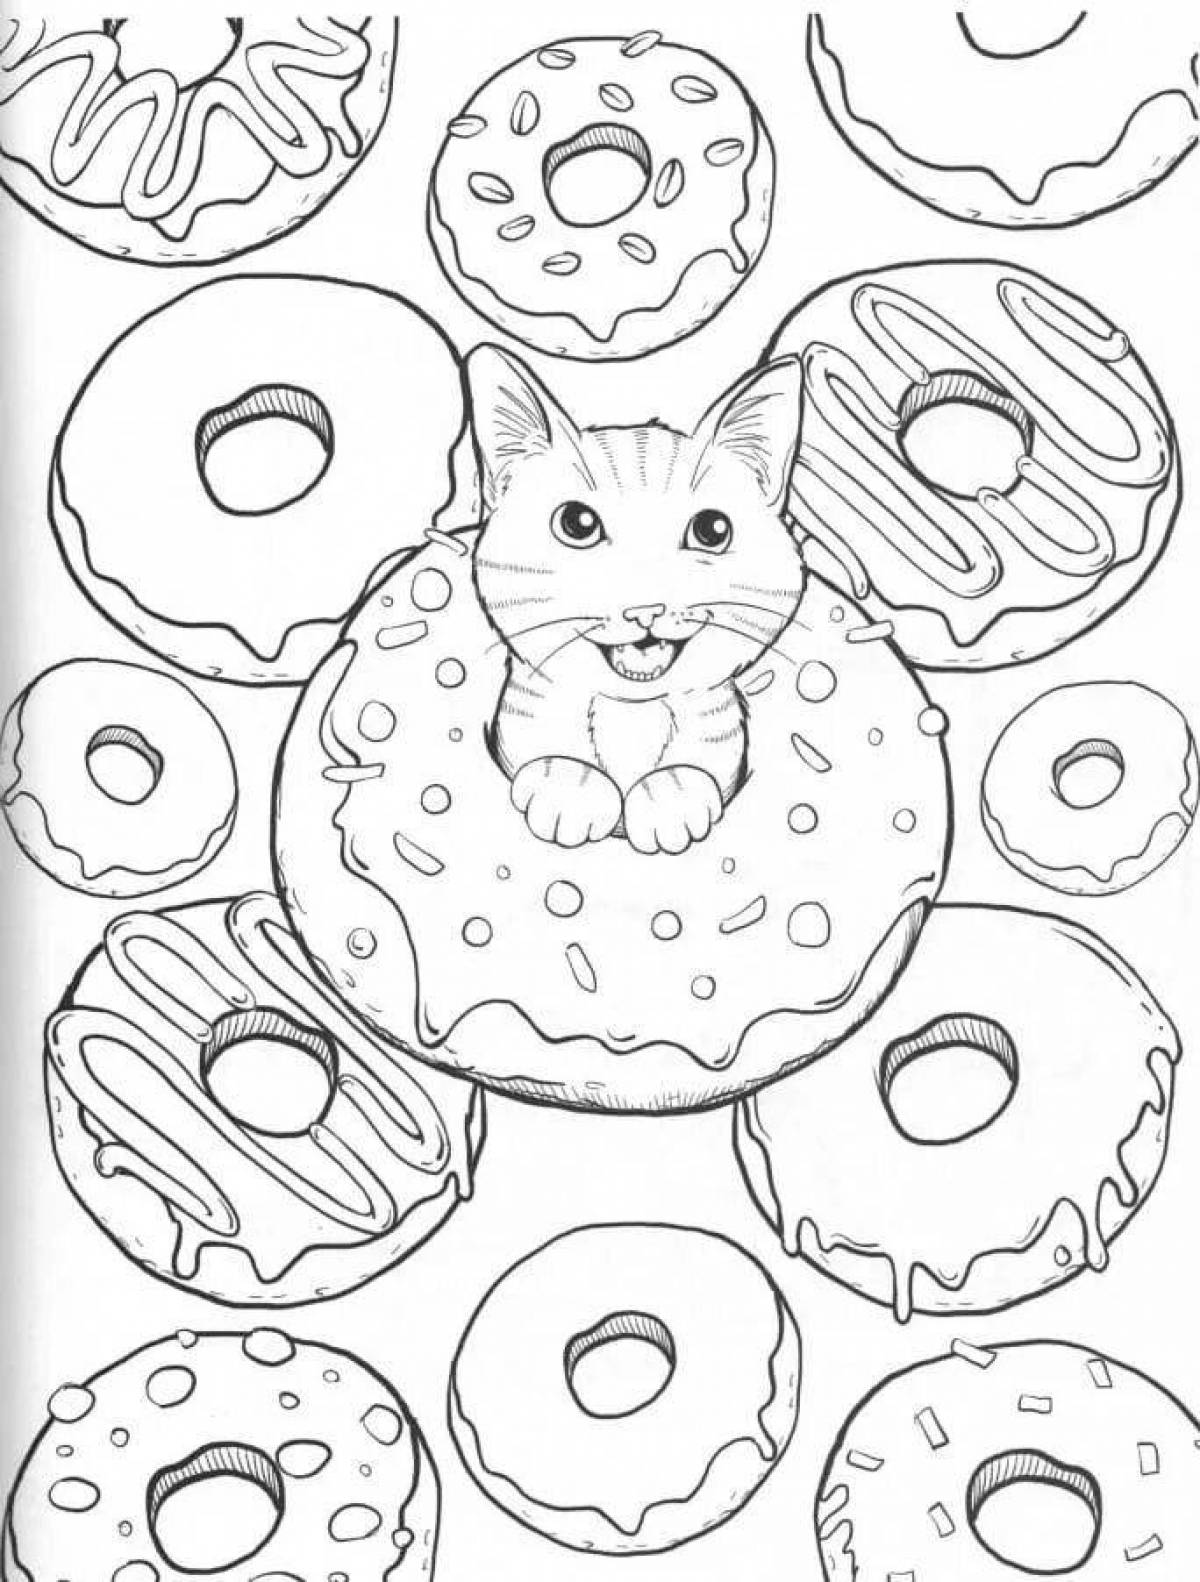 Nutritious cat donut coloring page